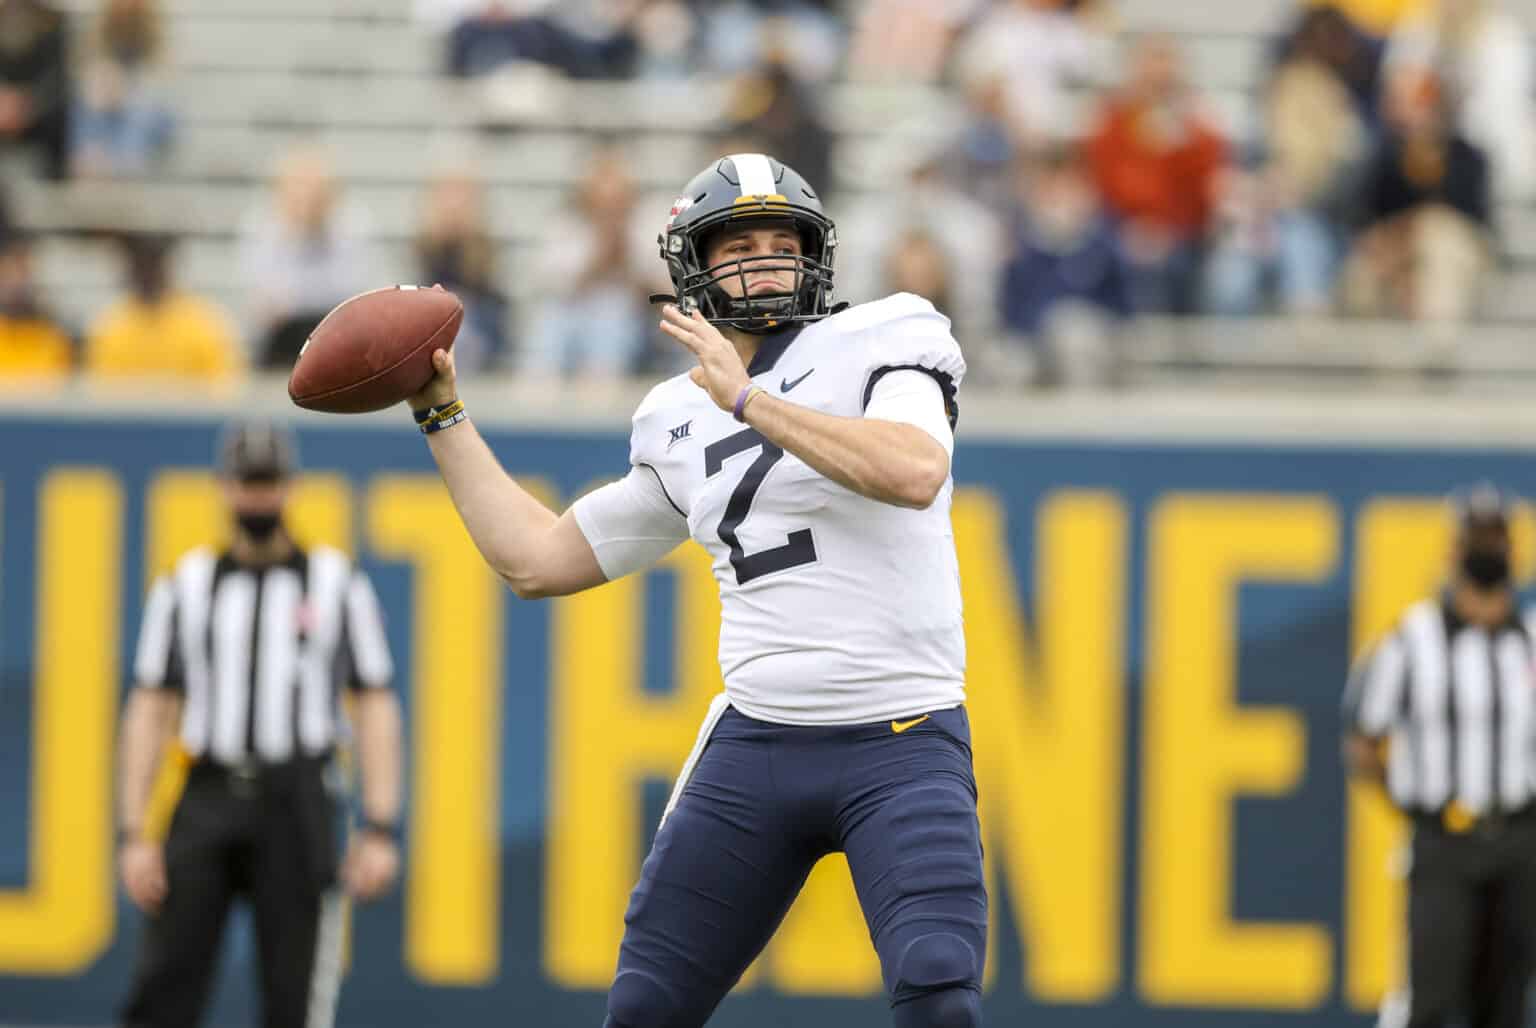 Outlet Picks WVU to Finish in Bottom Half of Big 12